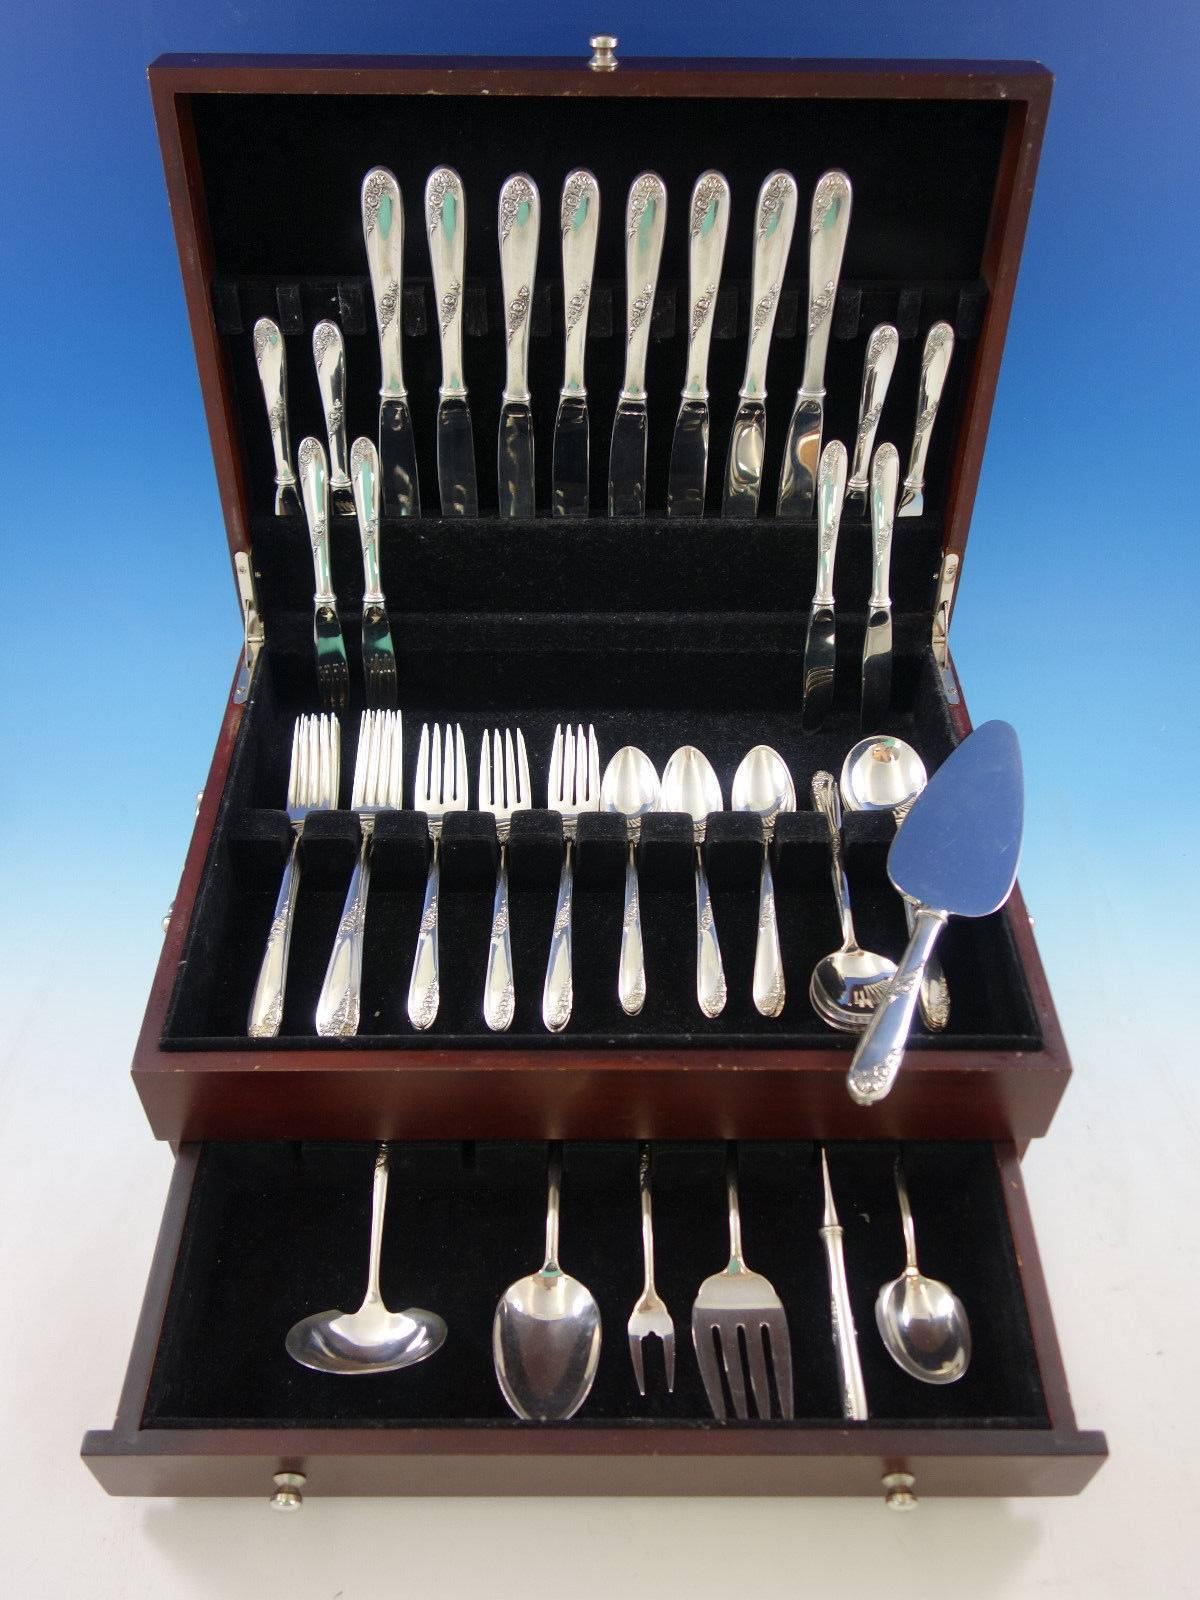 Sweetheart Rose by Lunt sterling silver flatware set, 55 pieces. This set includes: 

Eight knives, 9